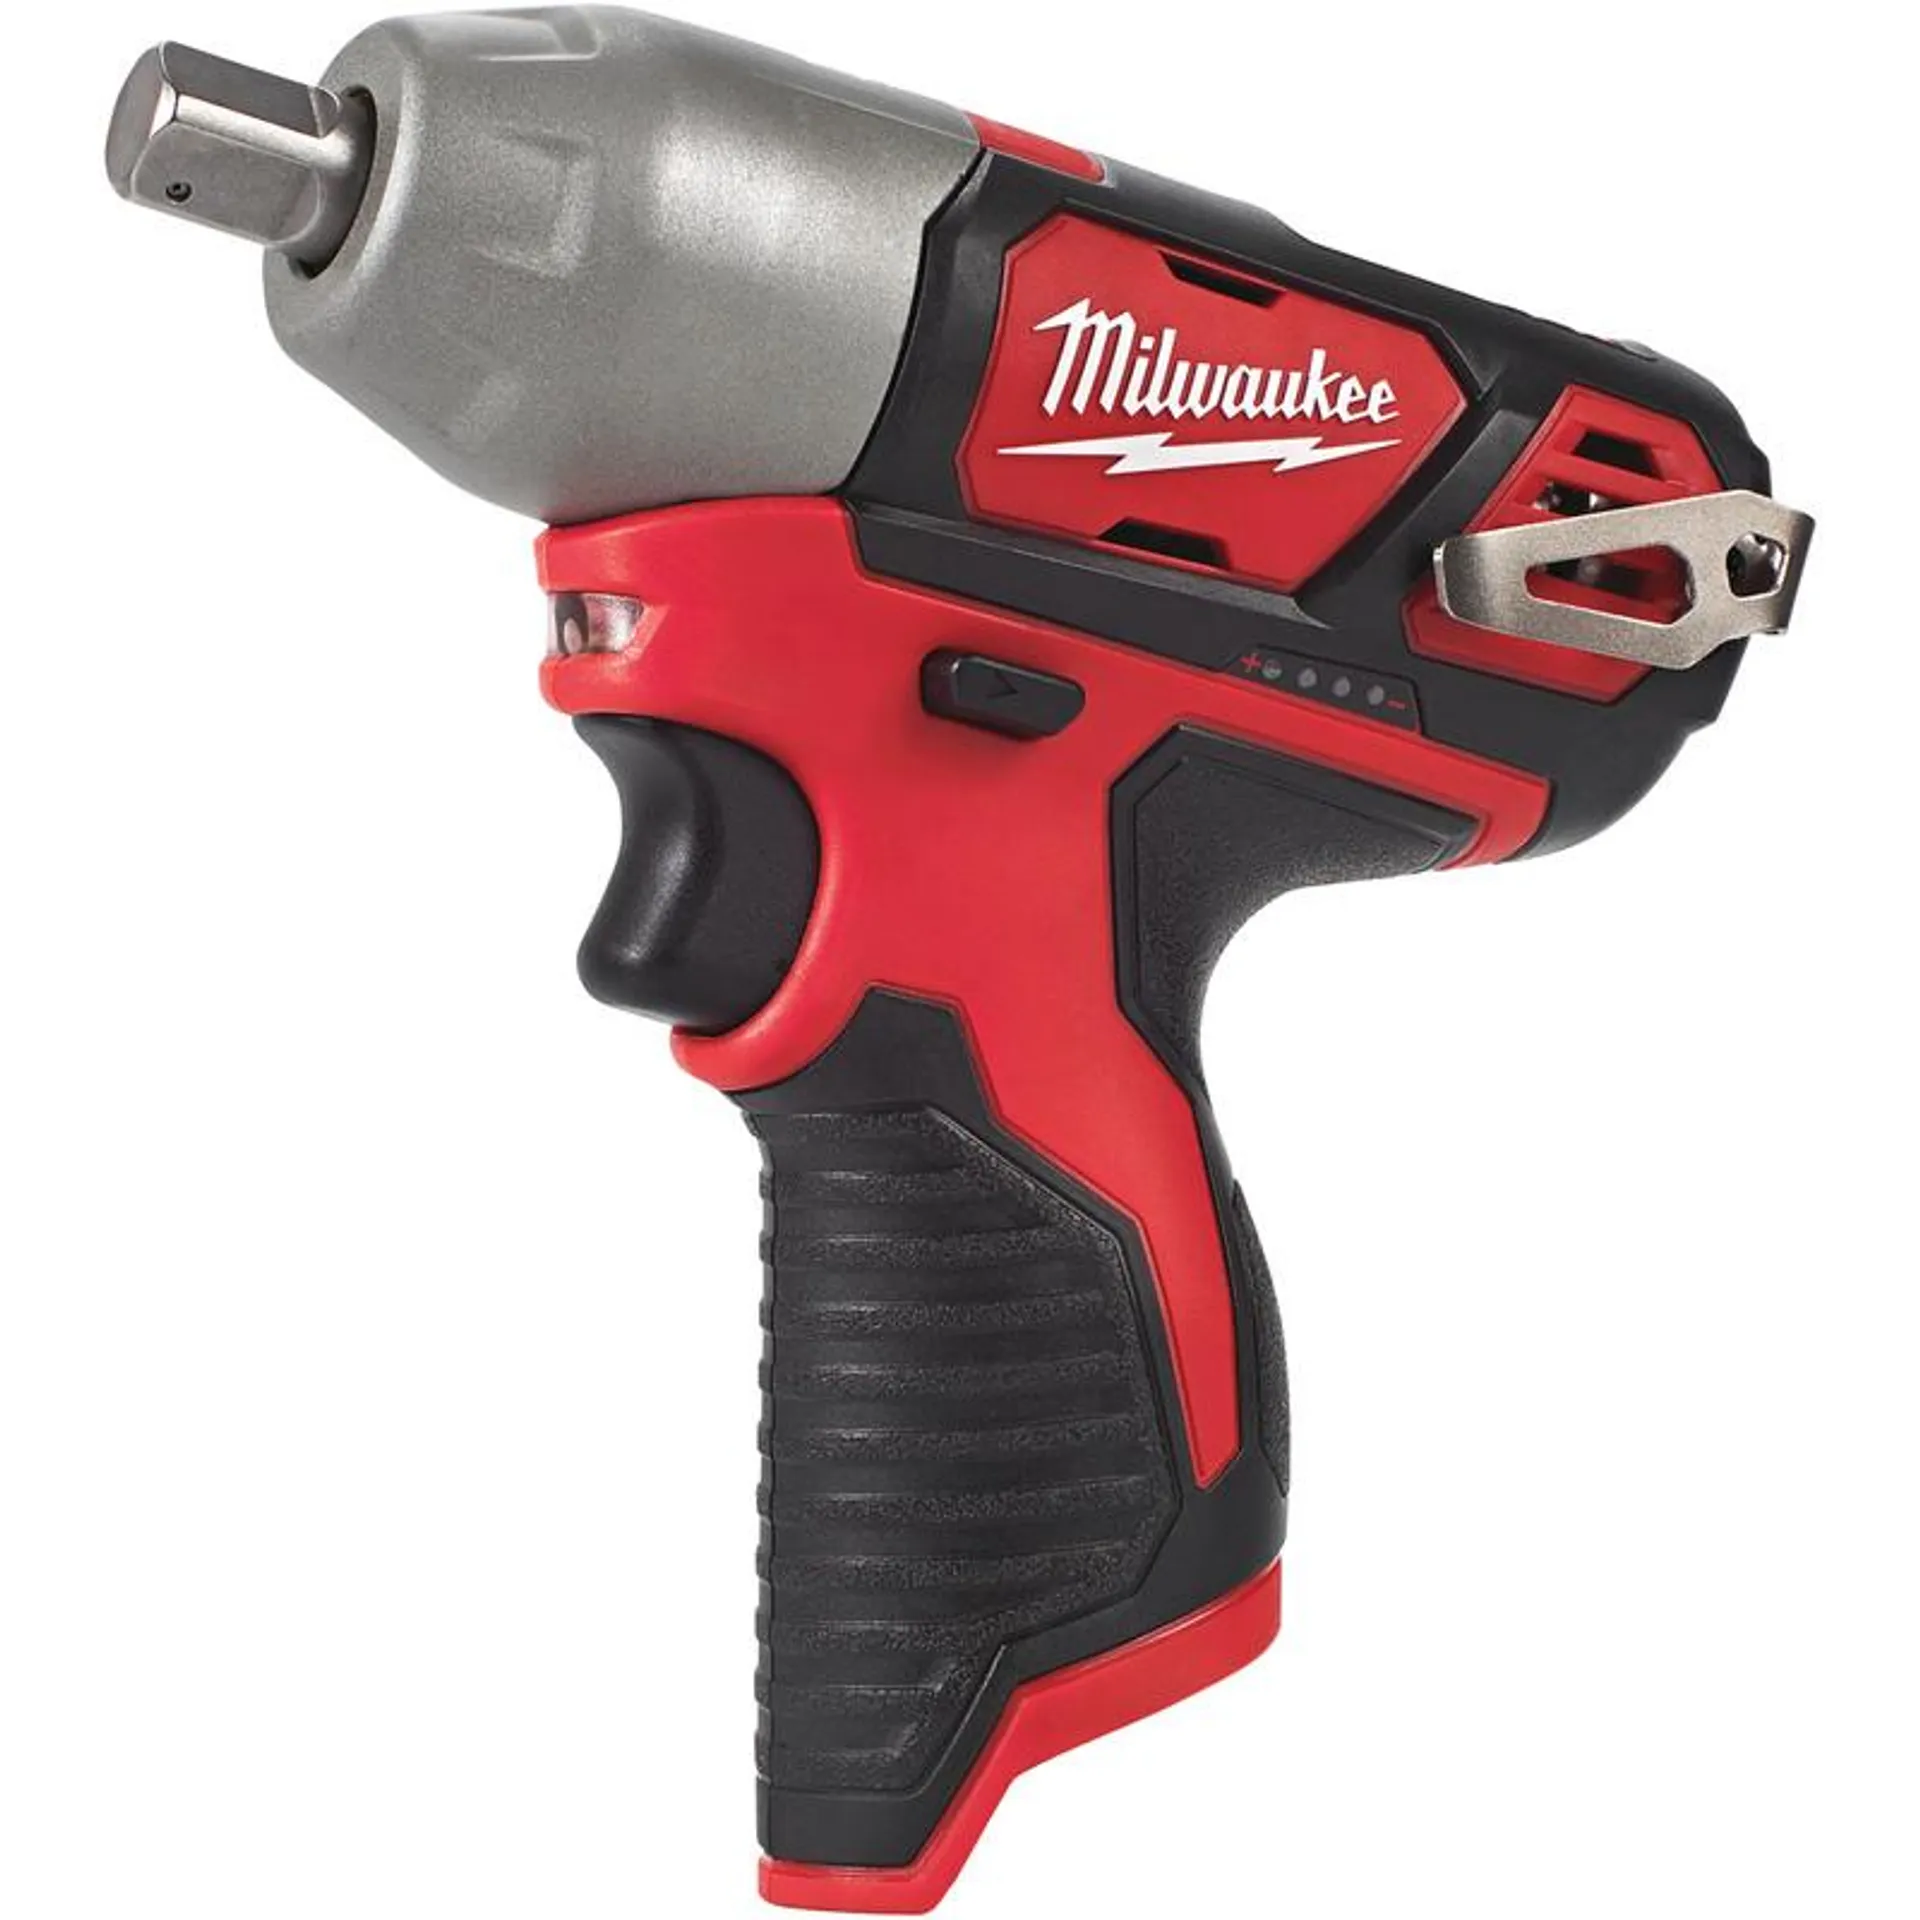 Milwaukee M12 BIW38-0 Sub Compact 3/8" Impact Wrench with Friction Ring Body Only